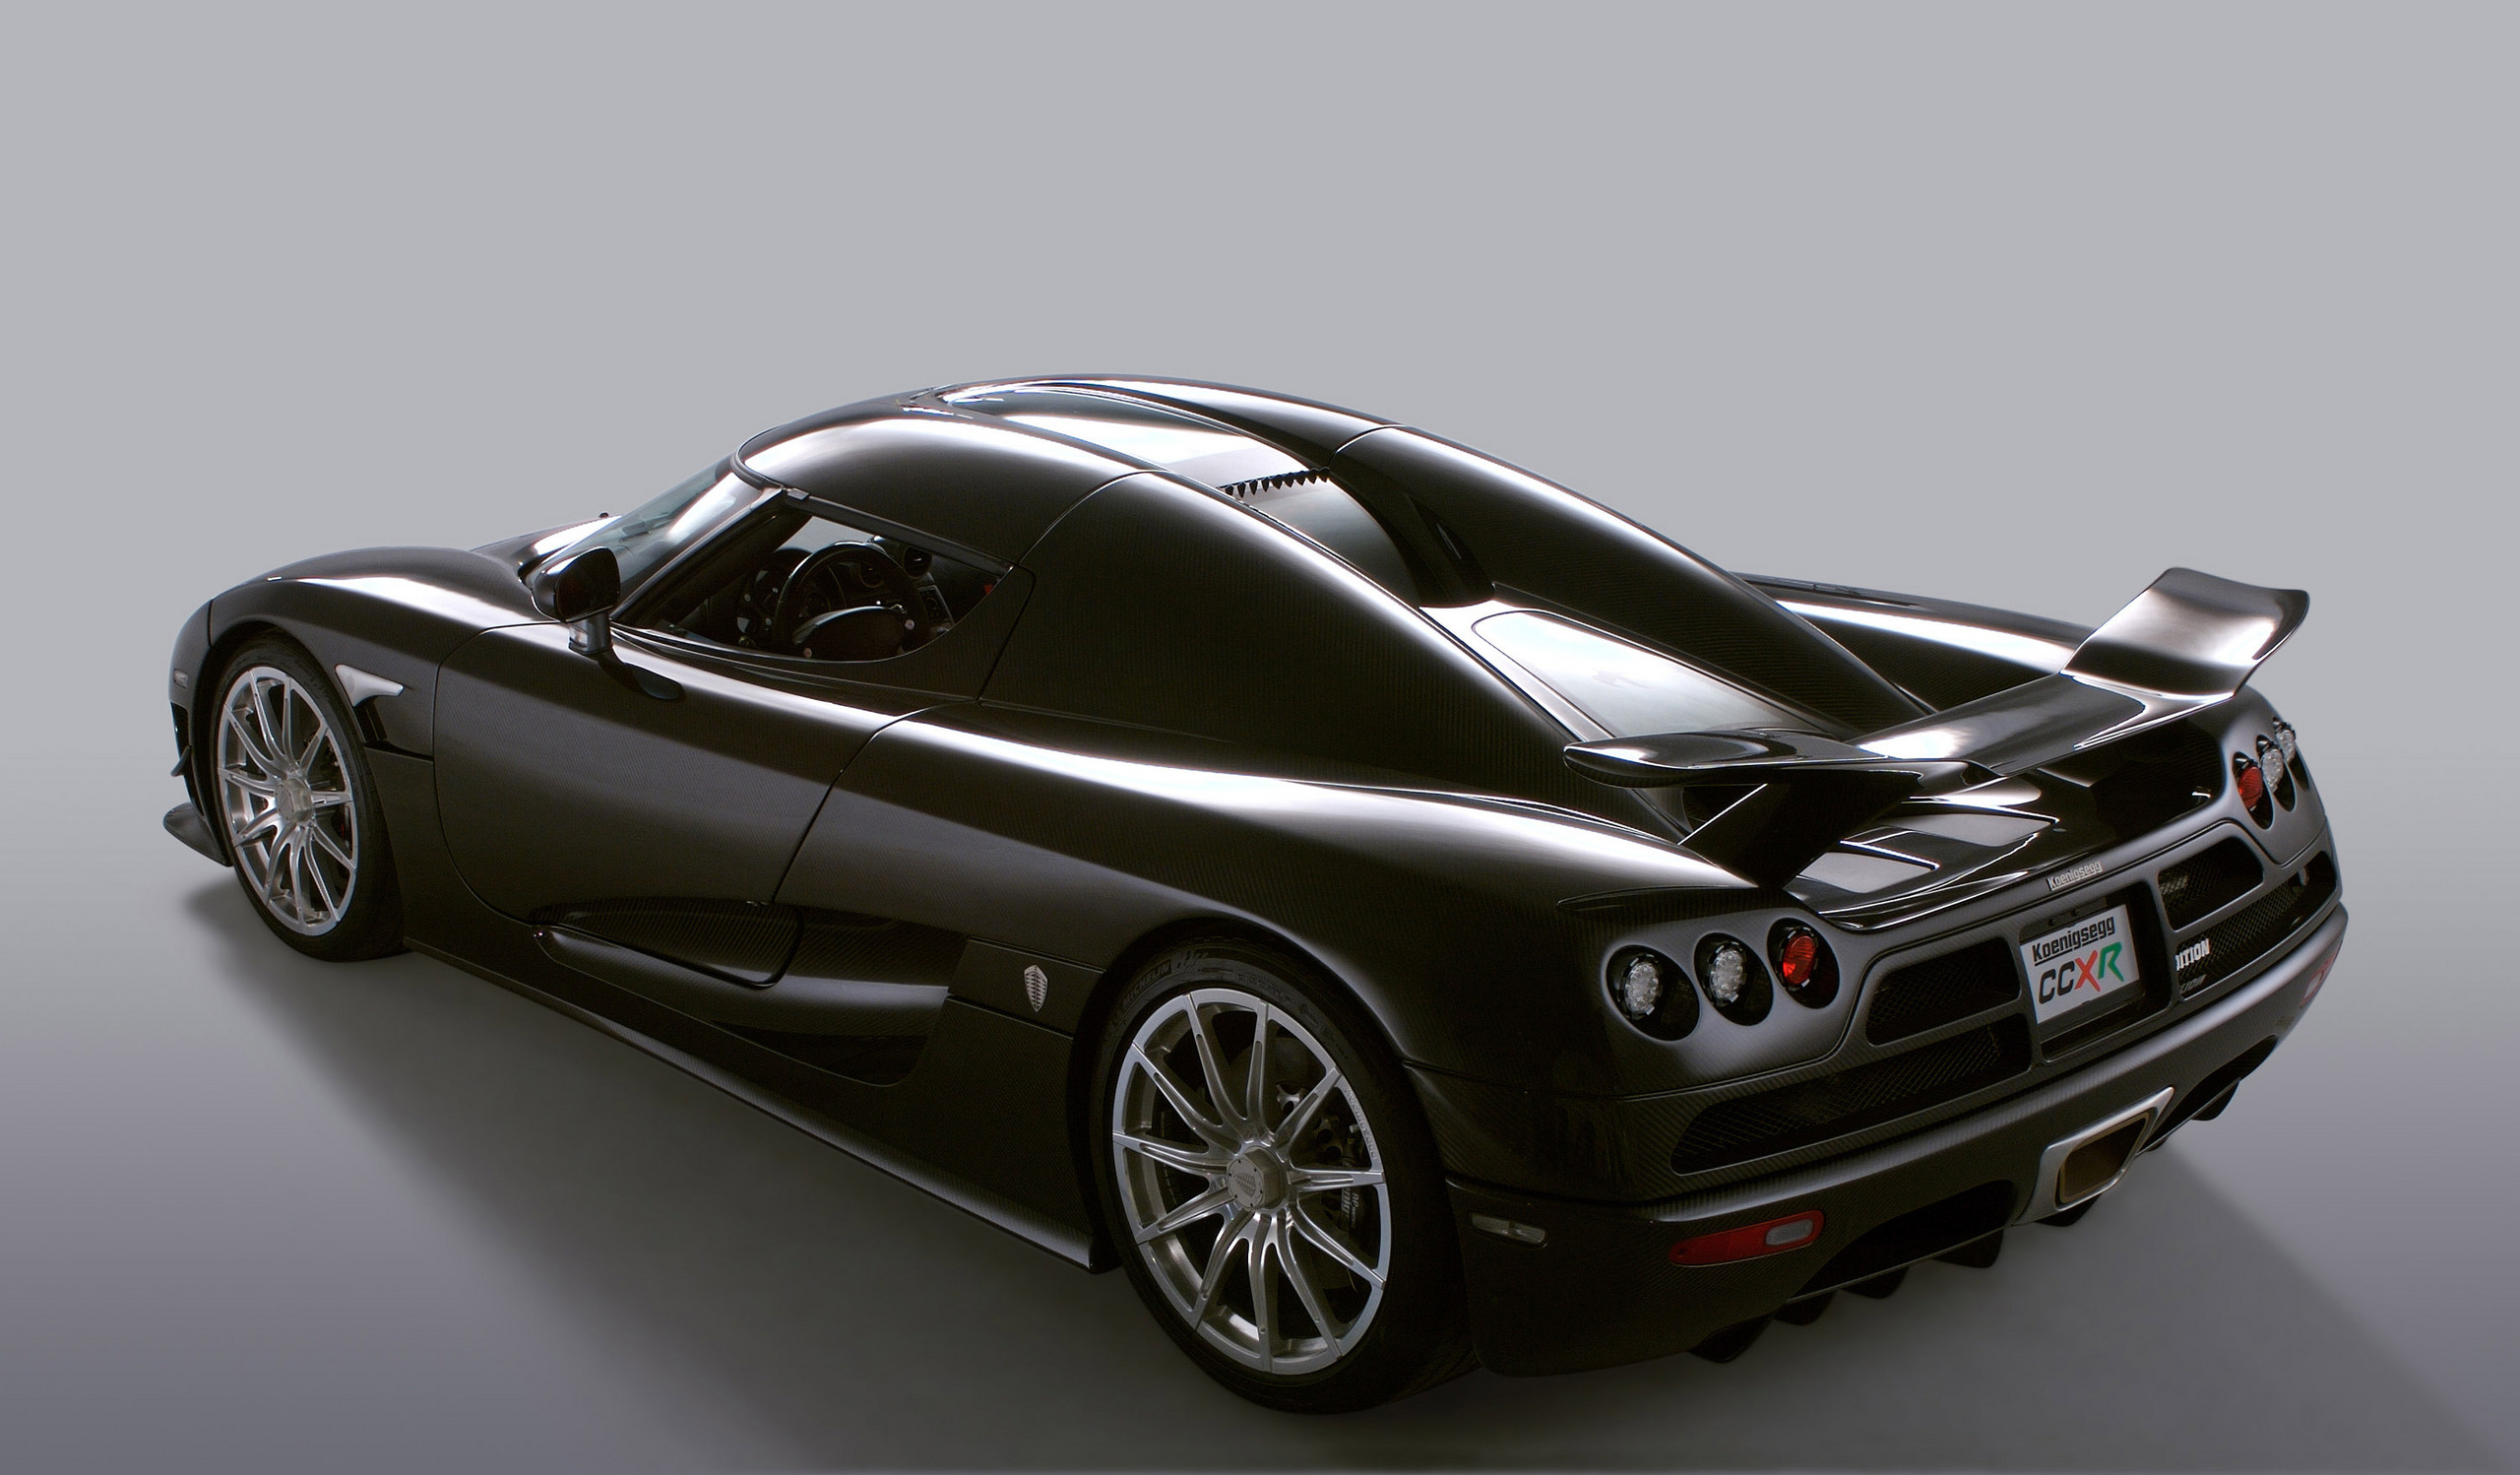 Exotic Cars images Koenigsegg CCXR HD wallpaper and background photos 